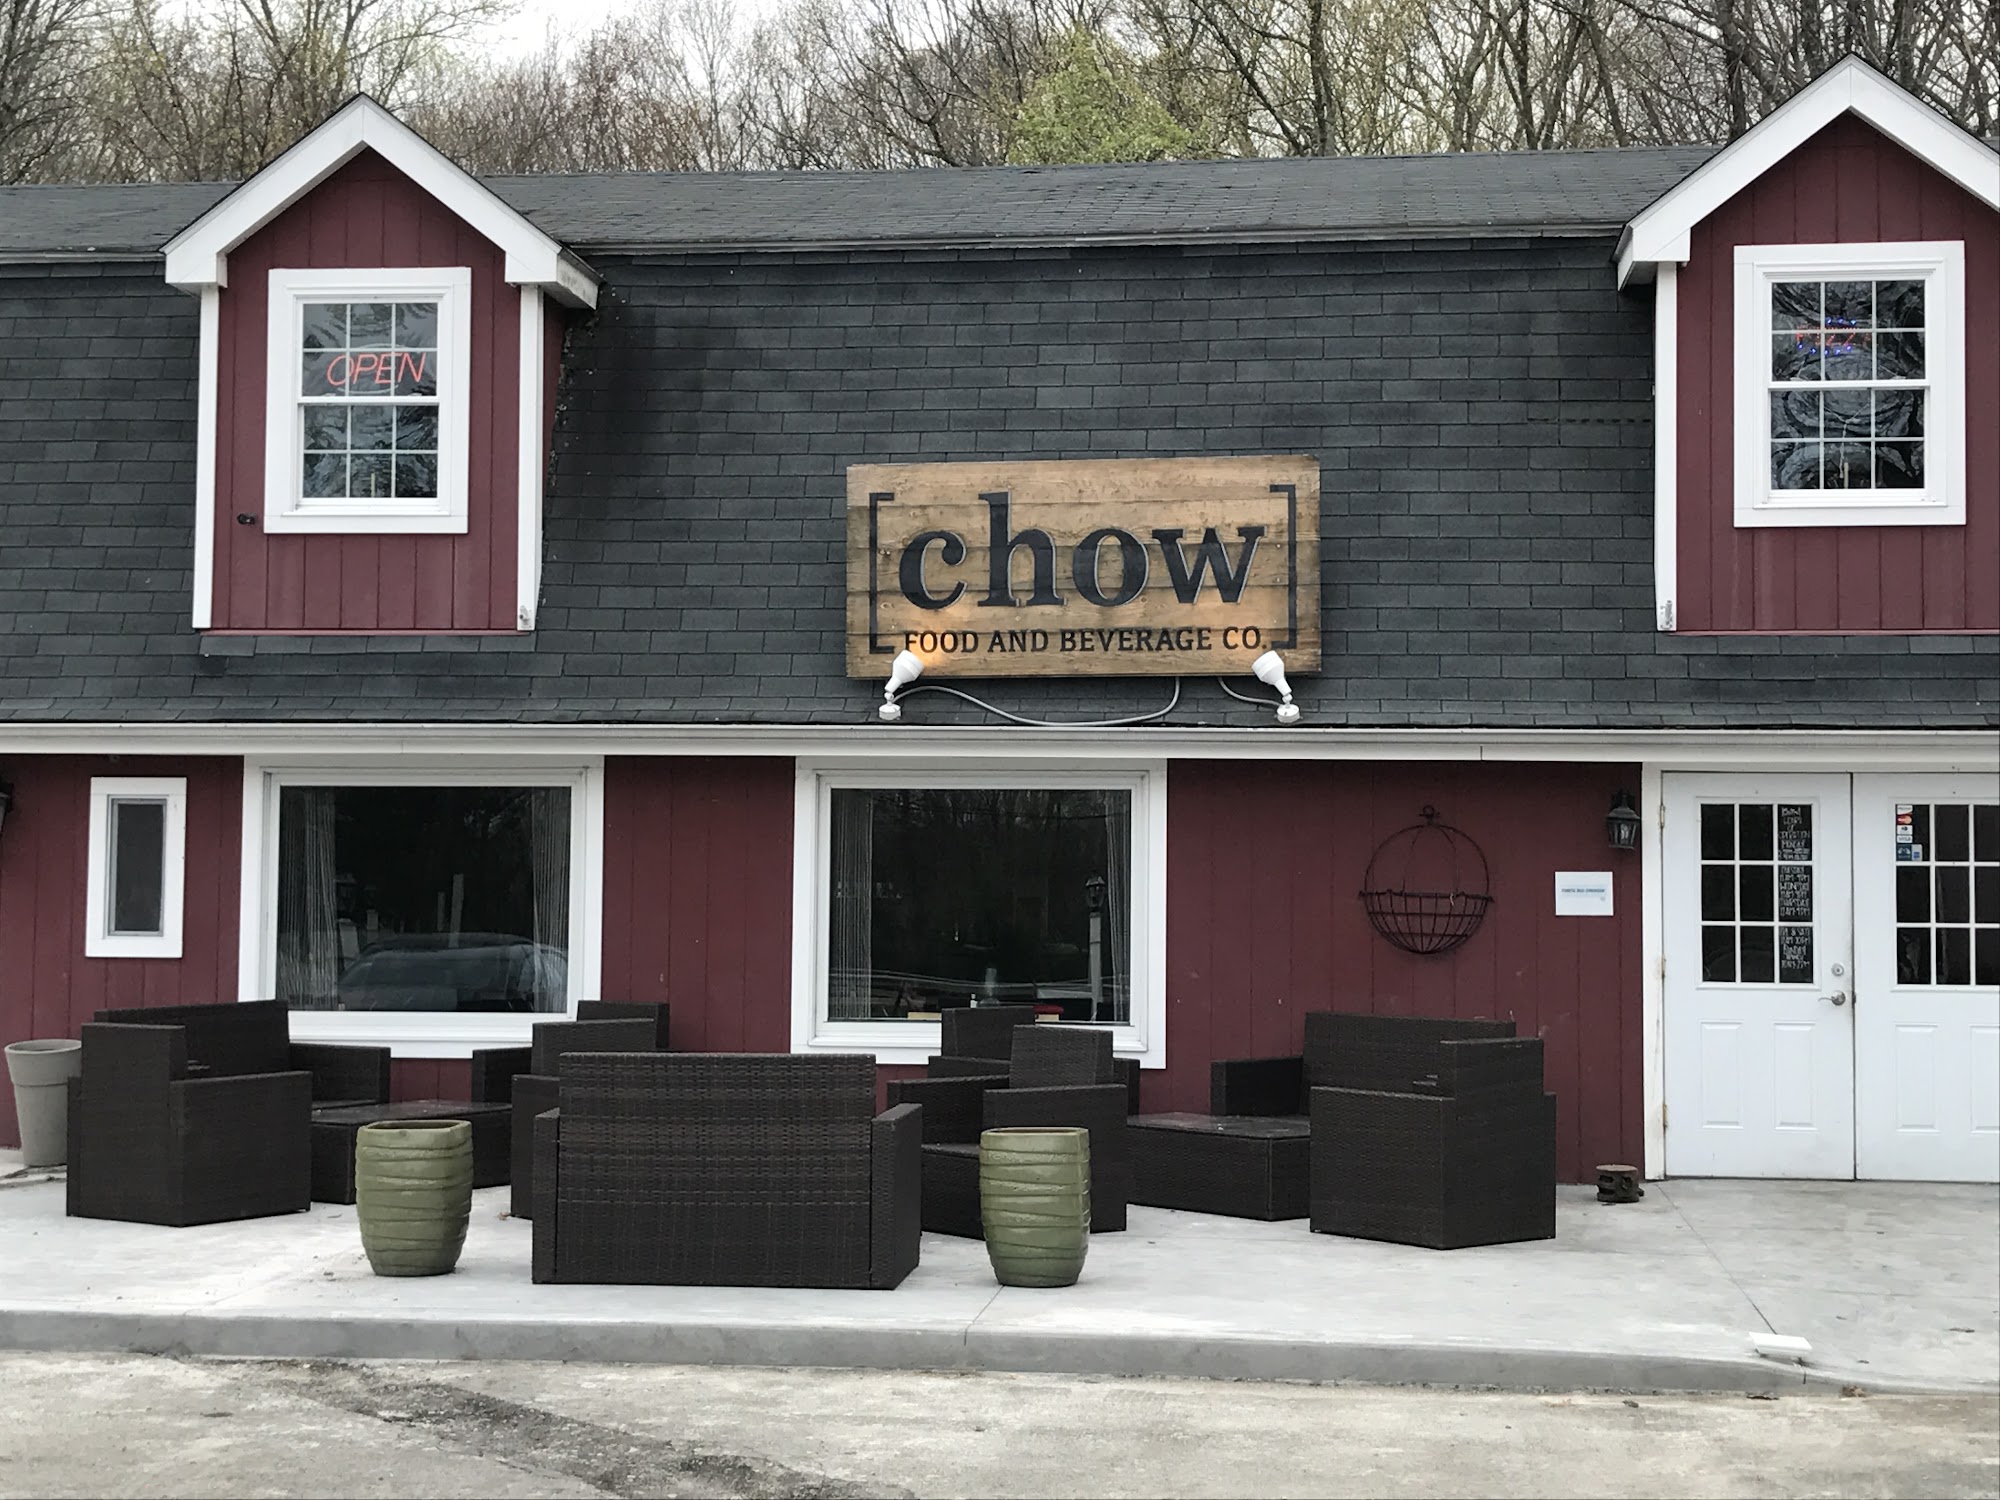 Chow Food and Beverage Company